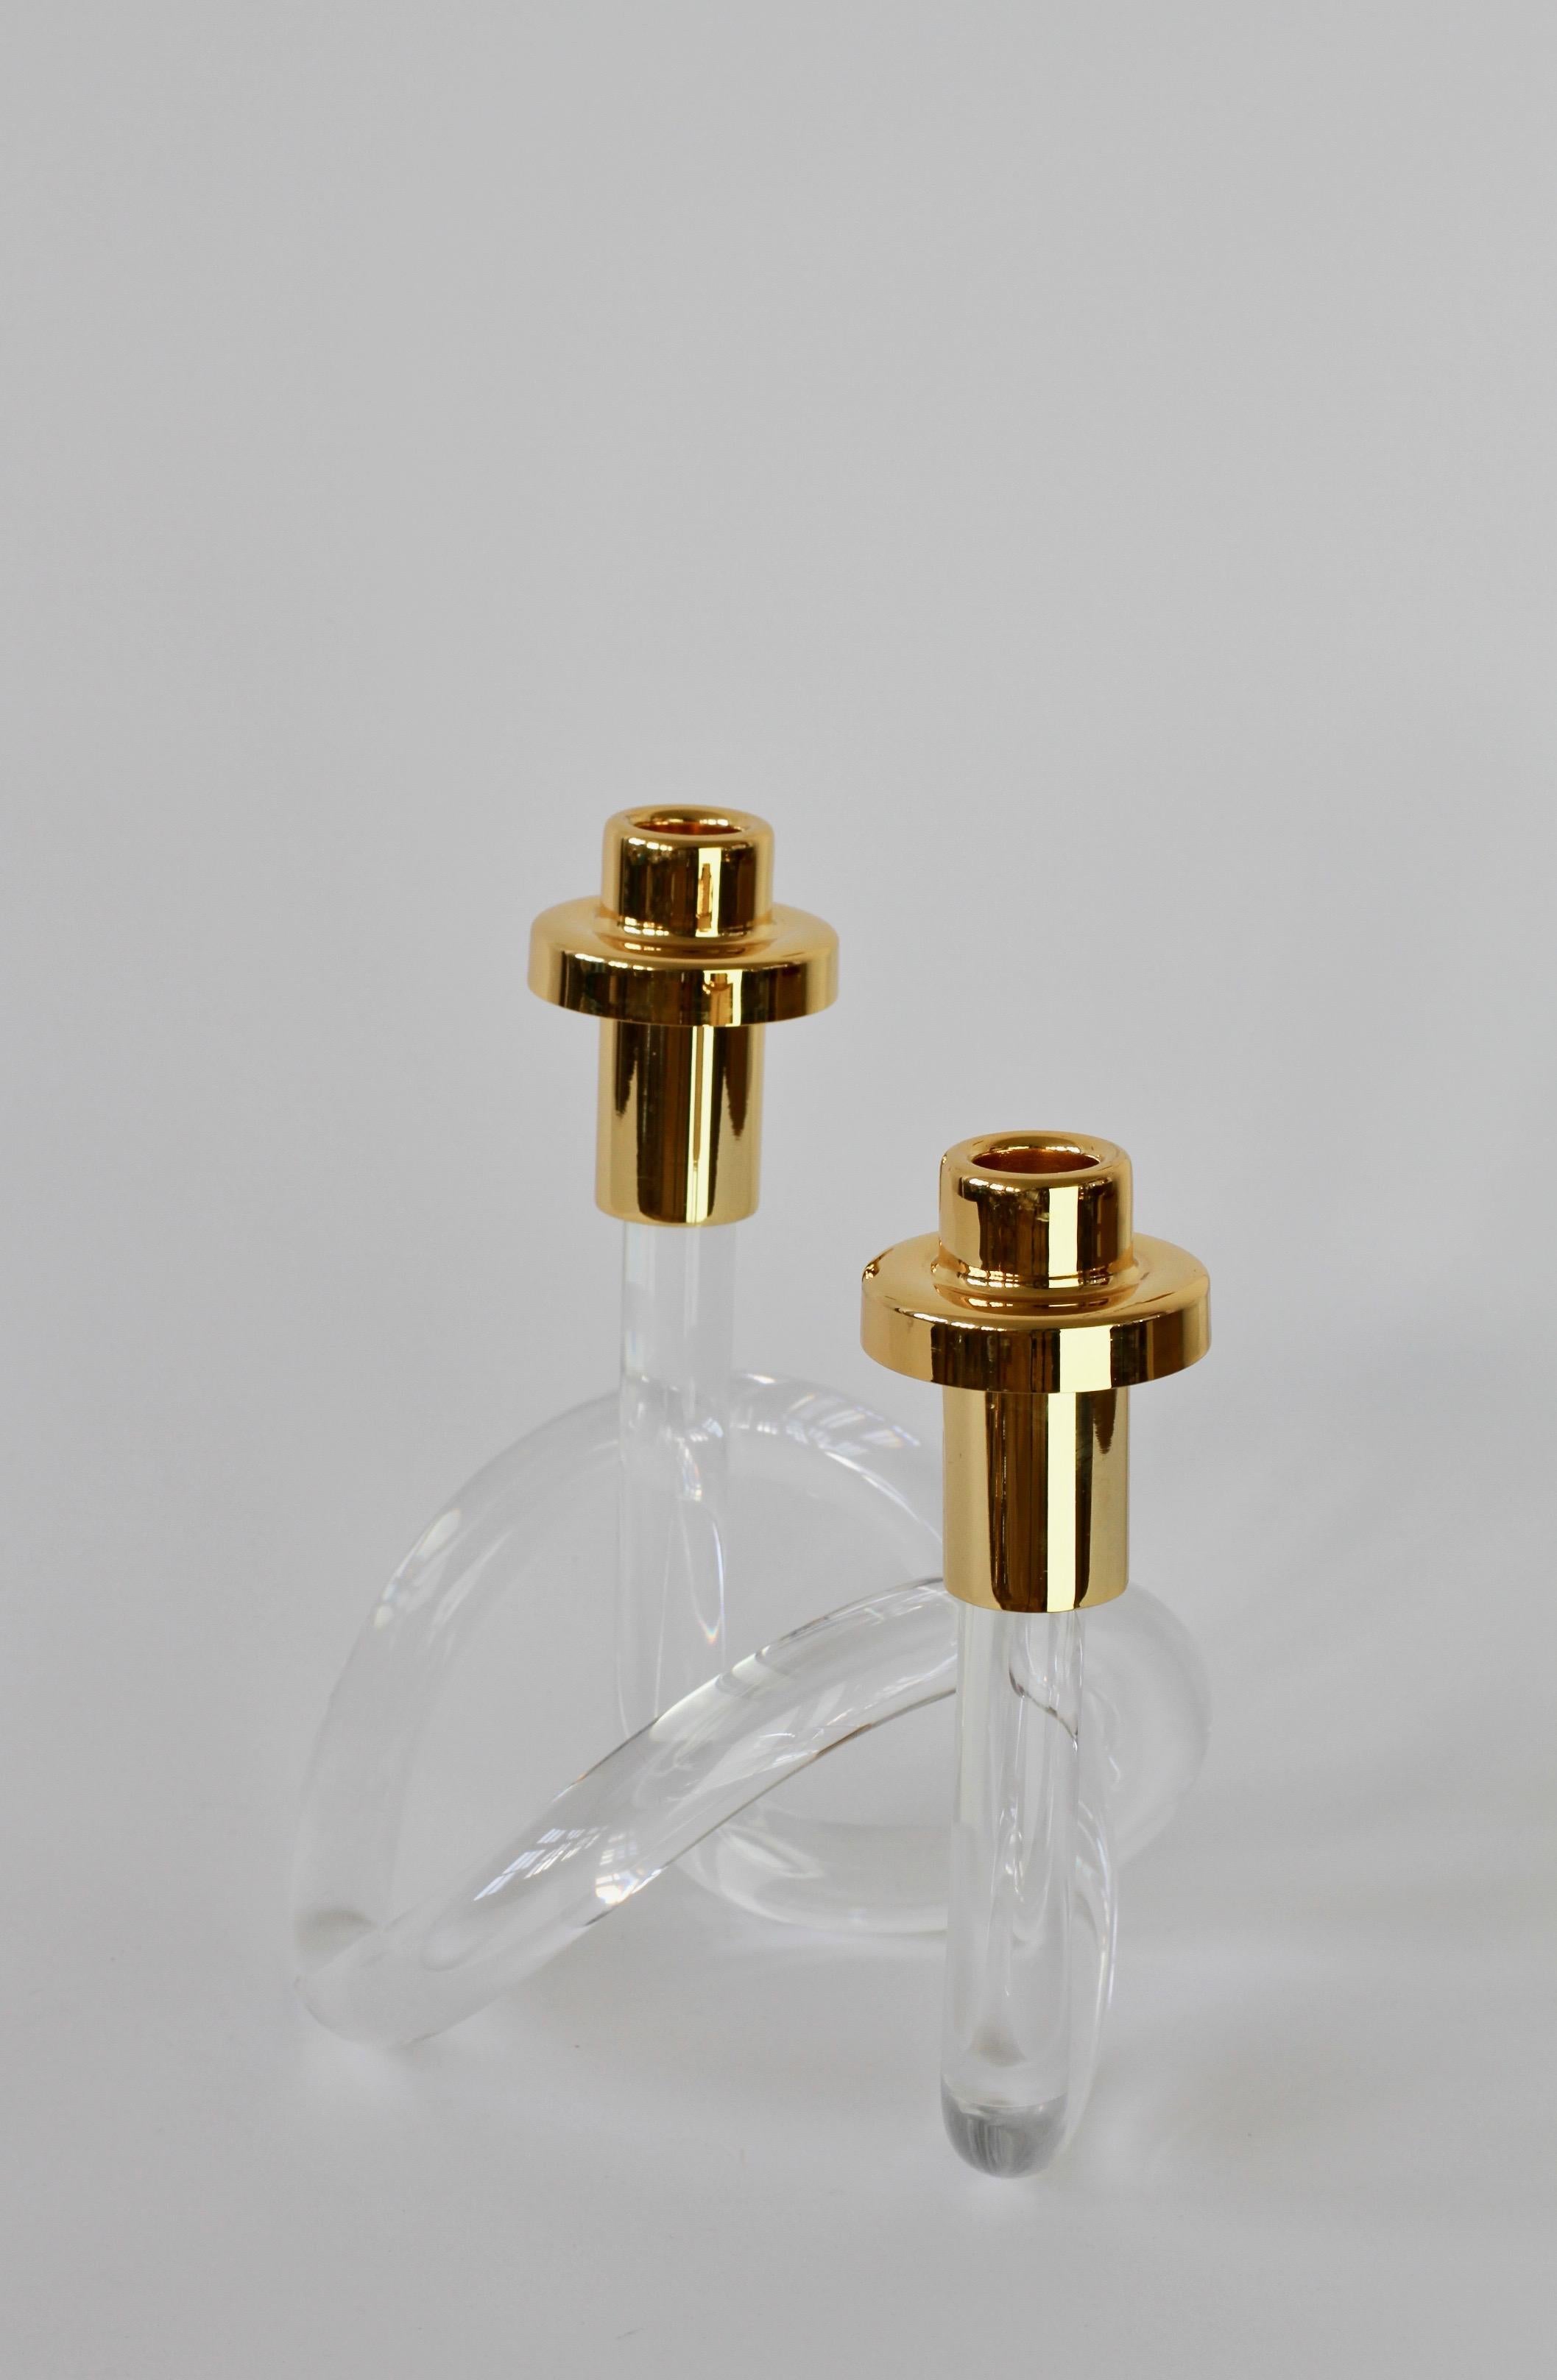 Gold and Lucite Twisted Pretzel Candlestick Holder/Candelabra by Dorothy Thorpe 1